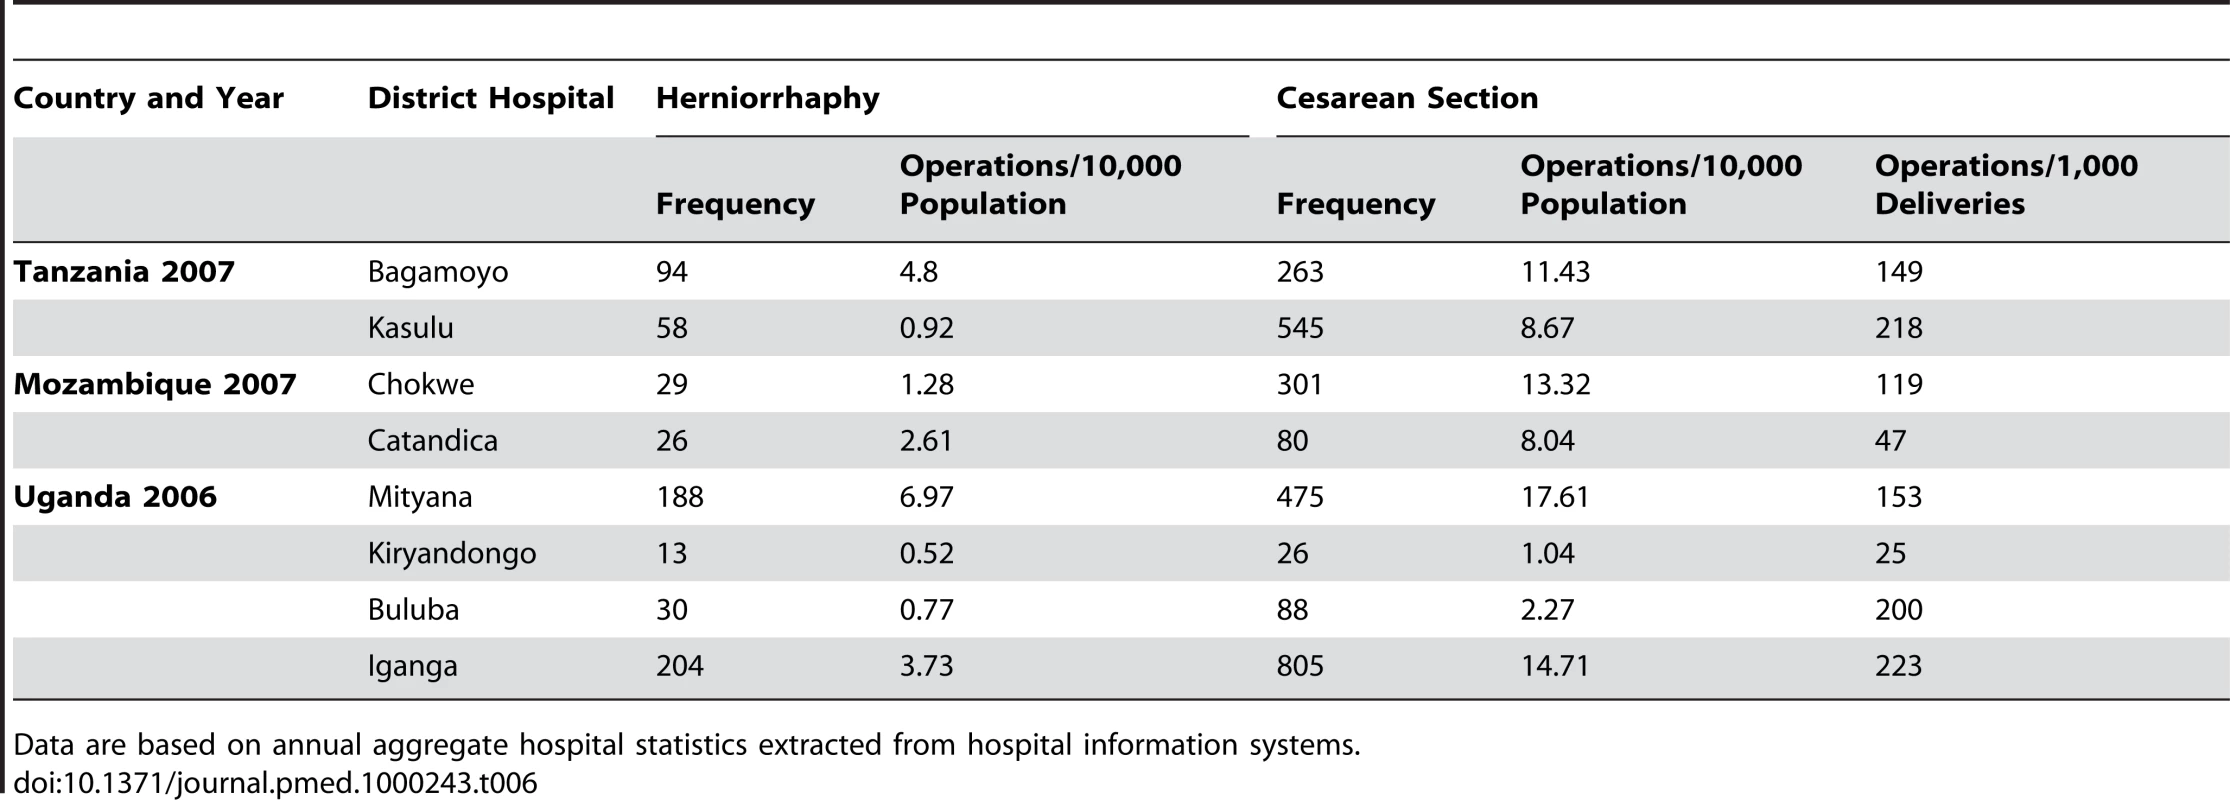 Annual rates of hernia operations and cesarean operations/10,000 population.